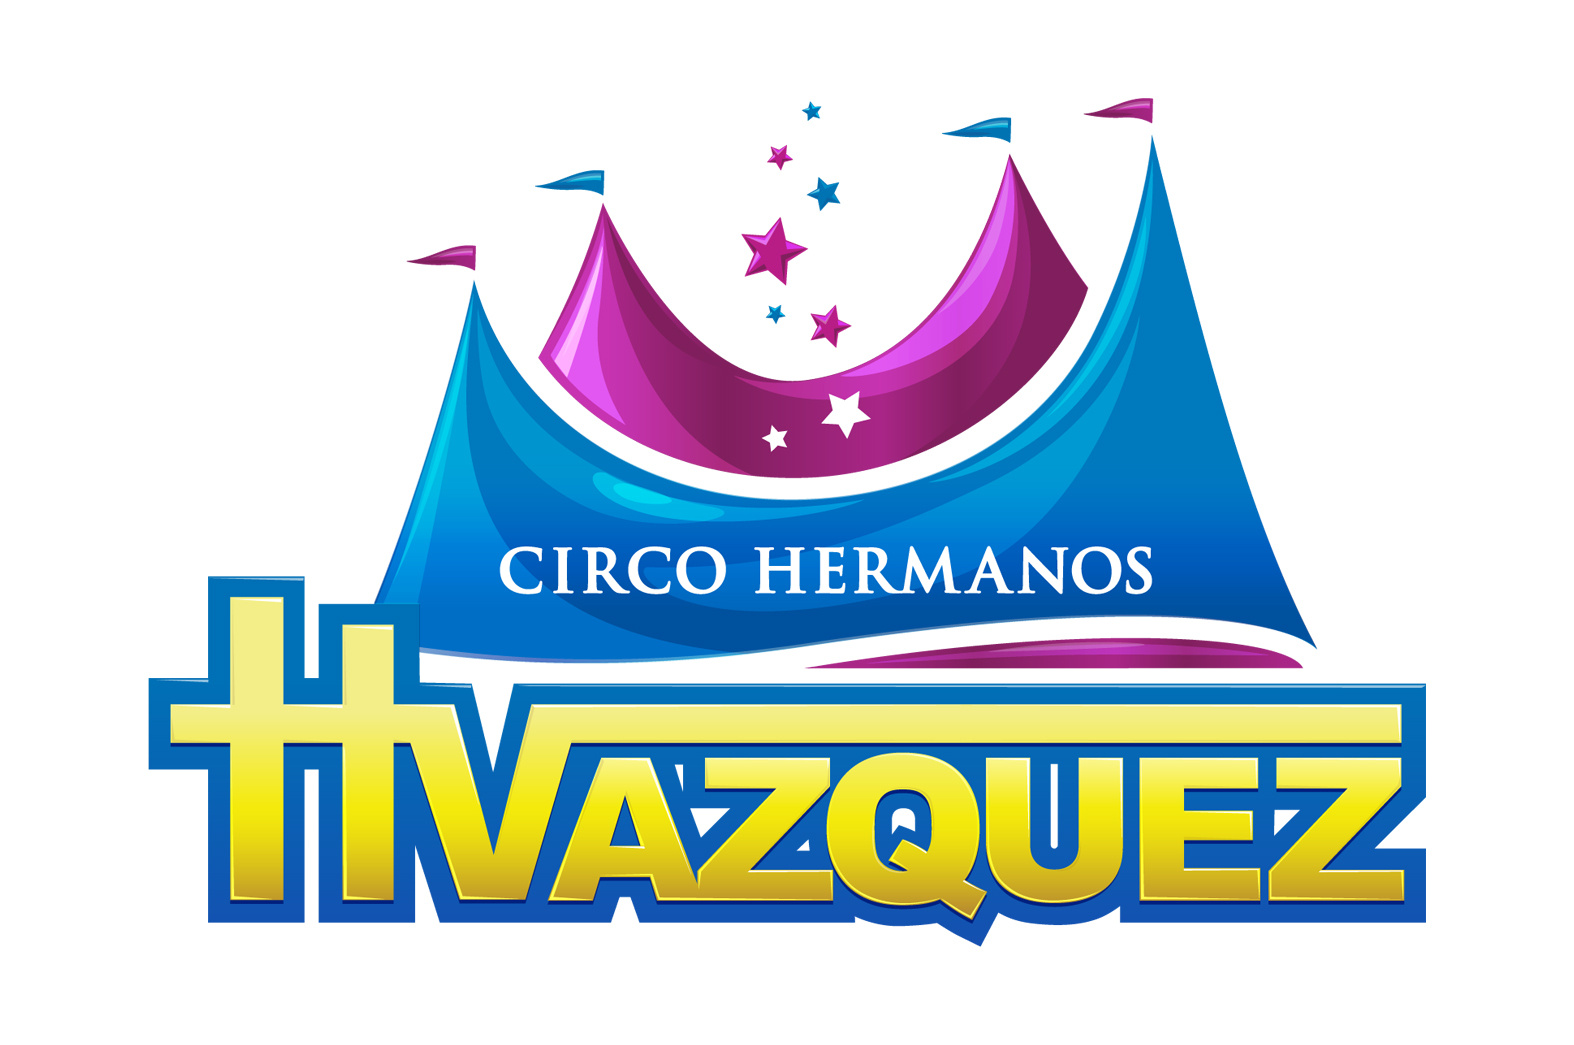 7-facts-you-must-know-about-circo-hermanos-vazquez